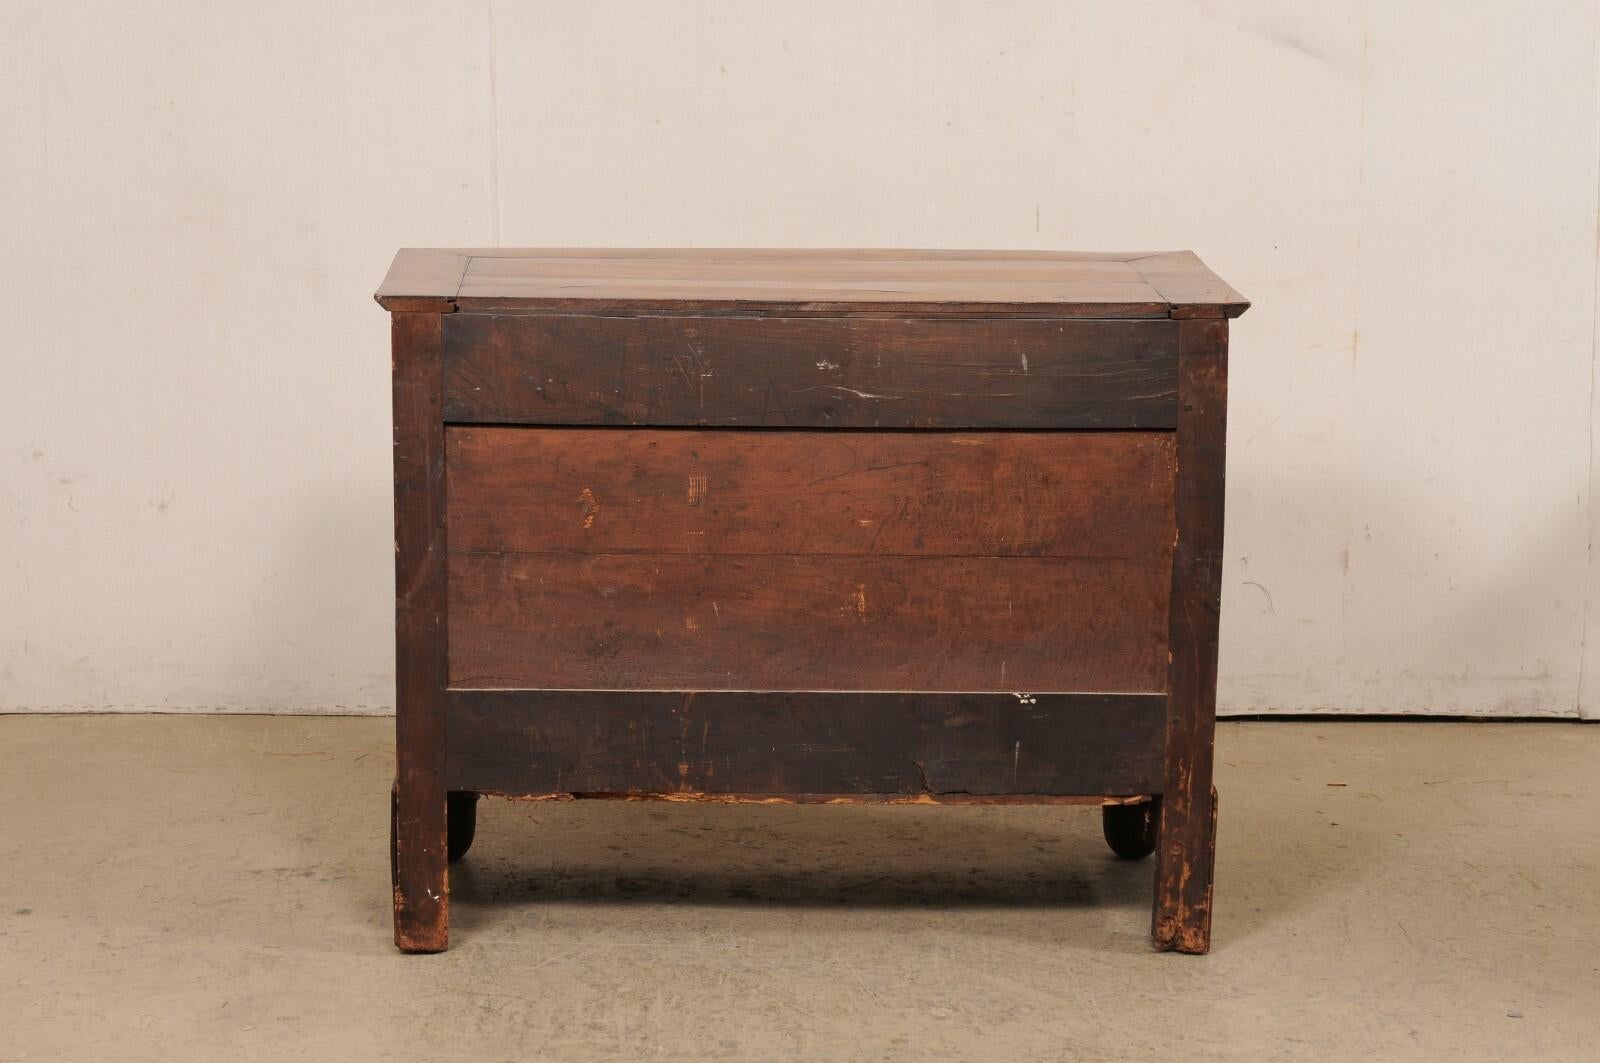 Neoclassic French Wooden Commode w/its Original Hardware, 19th Century For Sale 7